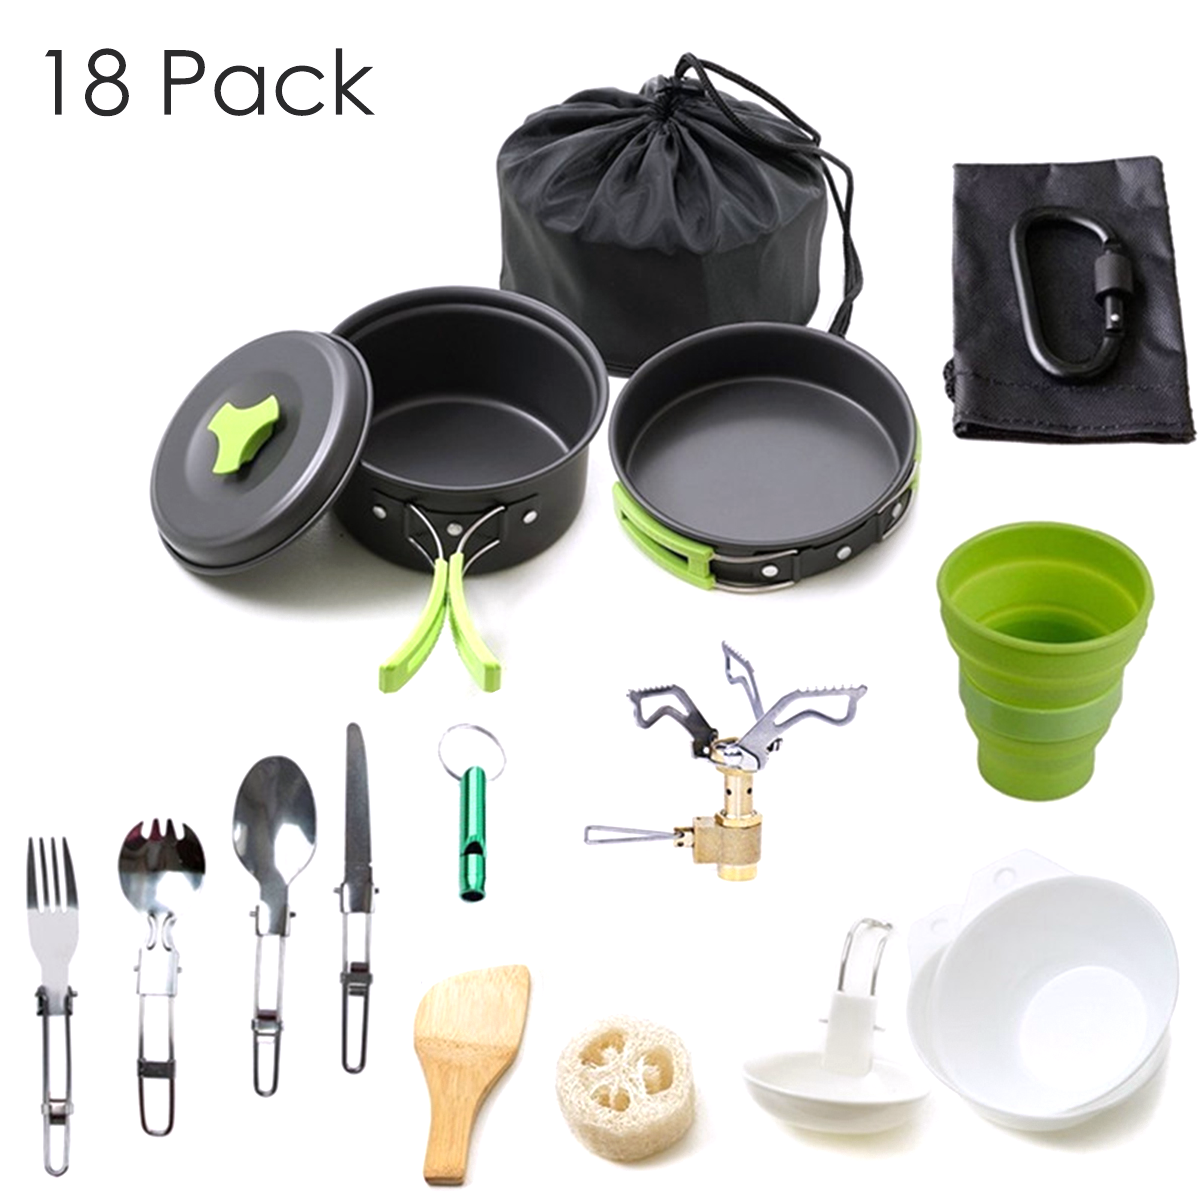 Camping 18 Piece Outdoor kitchenware Set Portable Camping Kitchen Utensil Set with Water Resistant Case for Outdoor Picnic BBQ Hiking